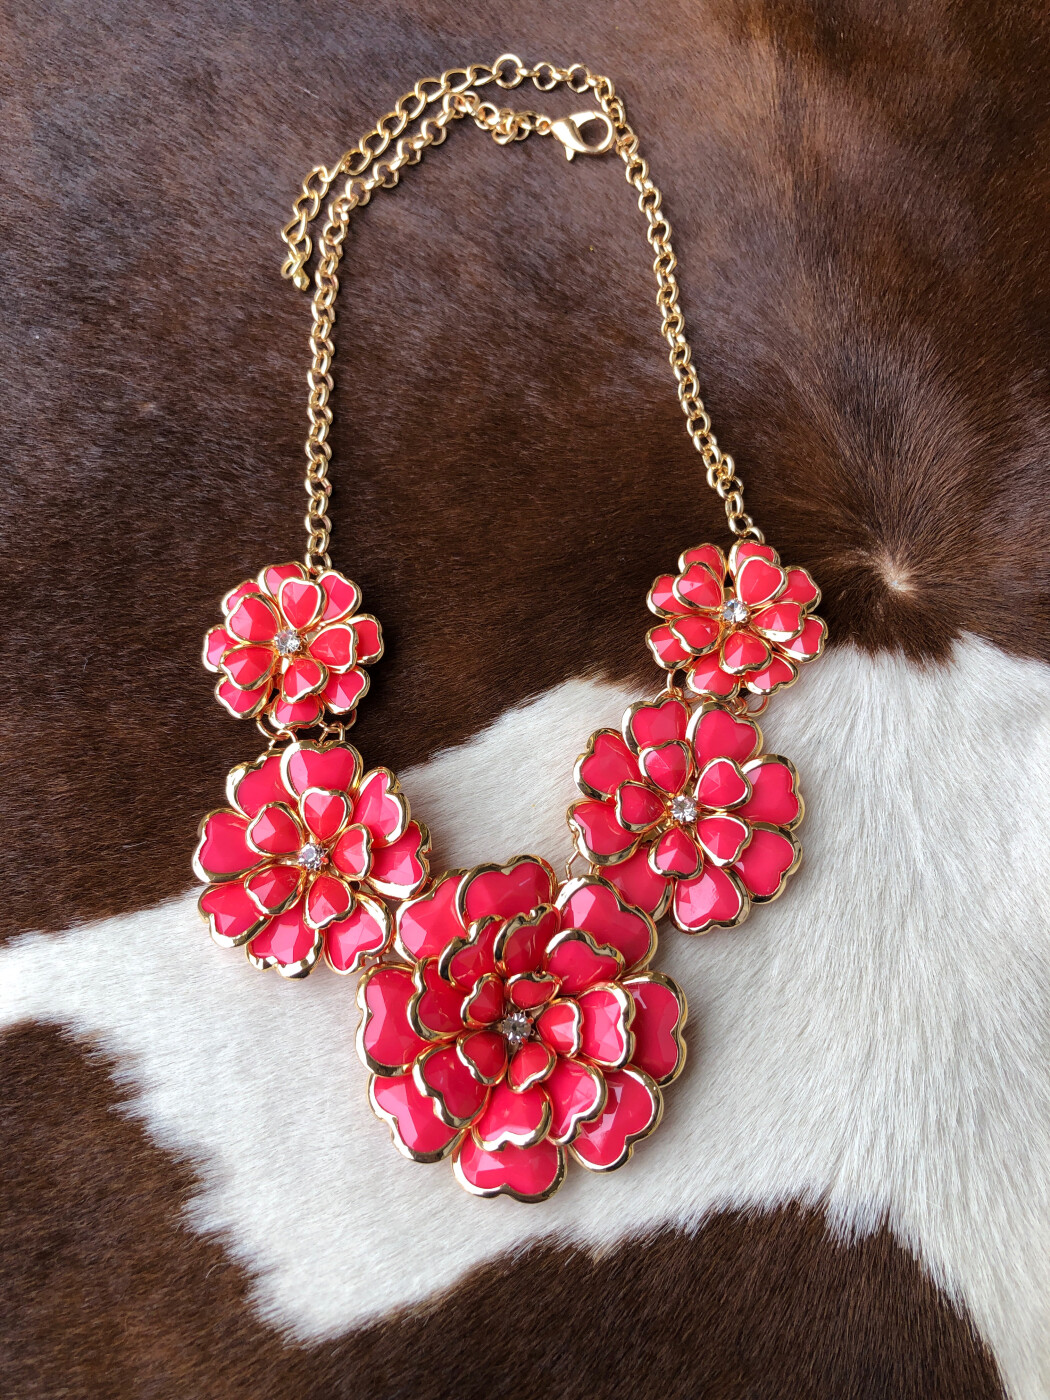 Flower Statement Necklace • Lilly Necklace